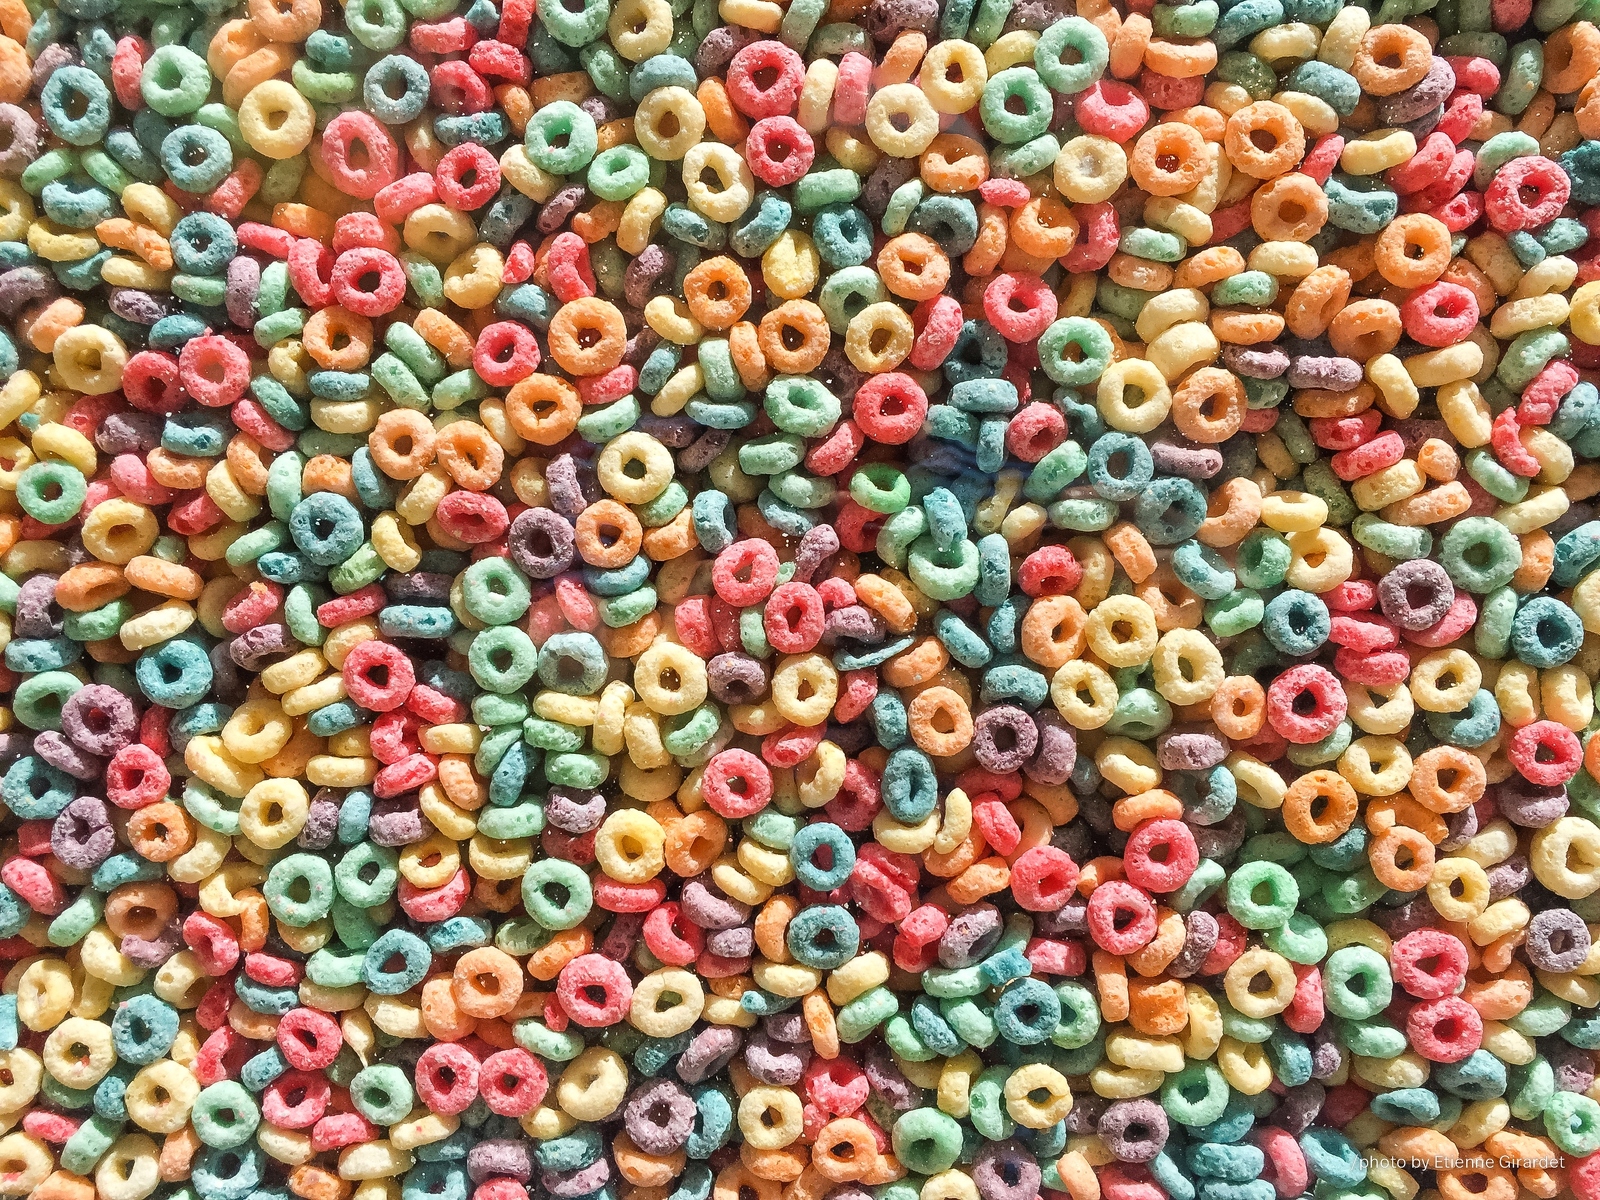 201707_28_IMG_5981-wallpaper-colored-cereals-by-E-Girardet.jpg